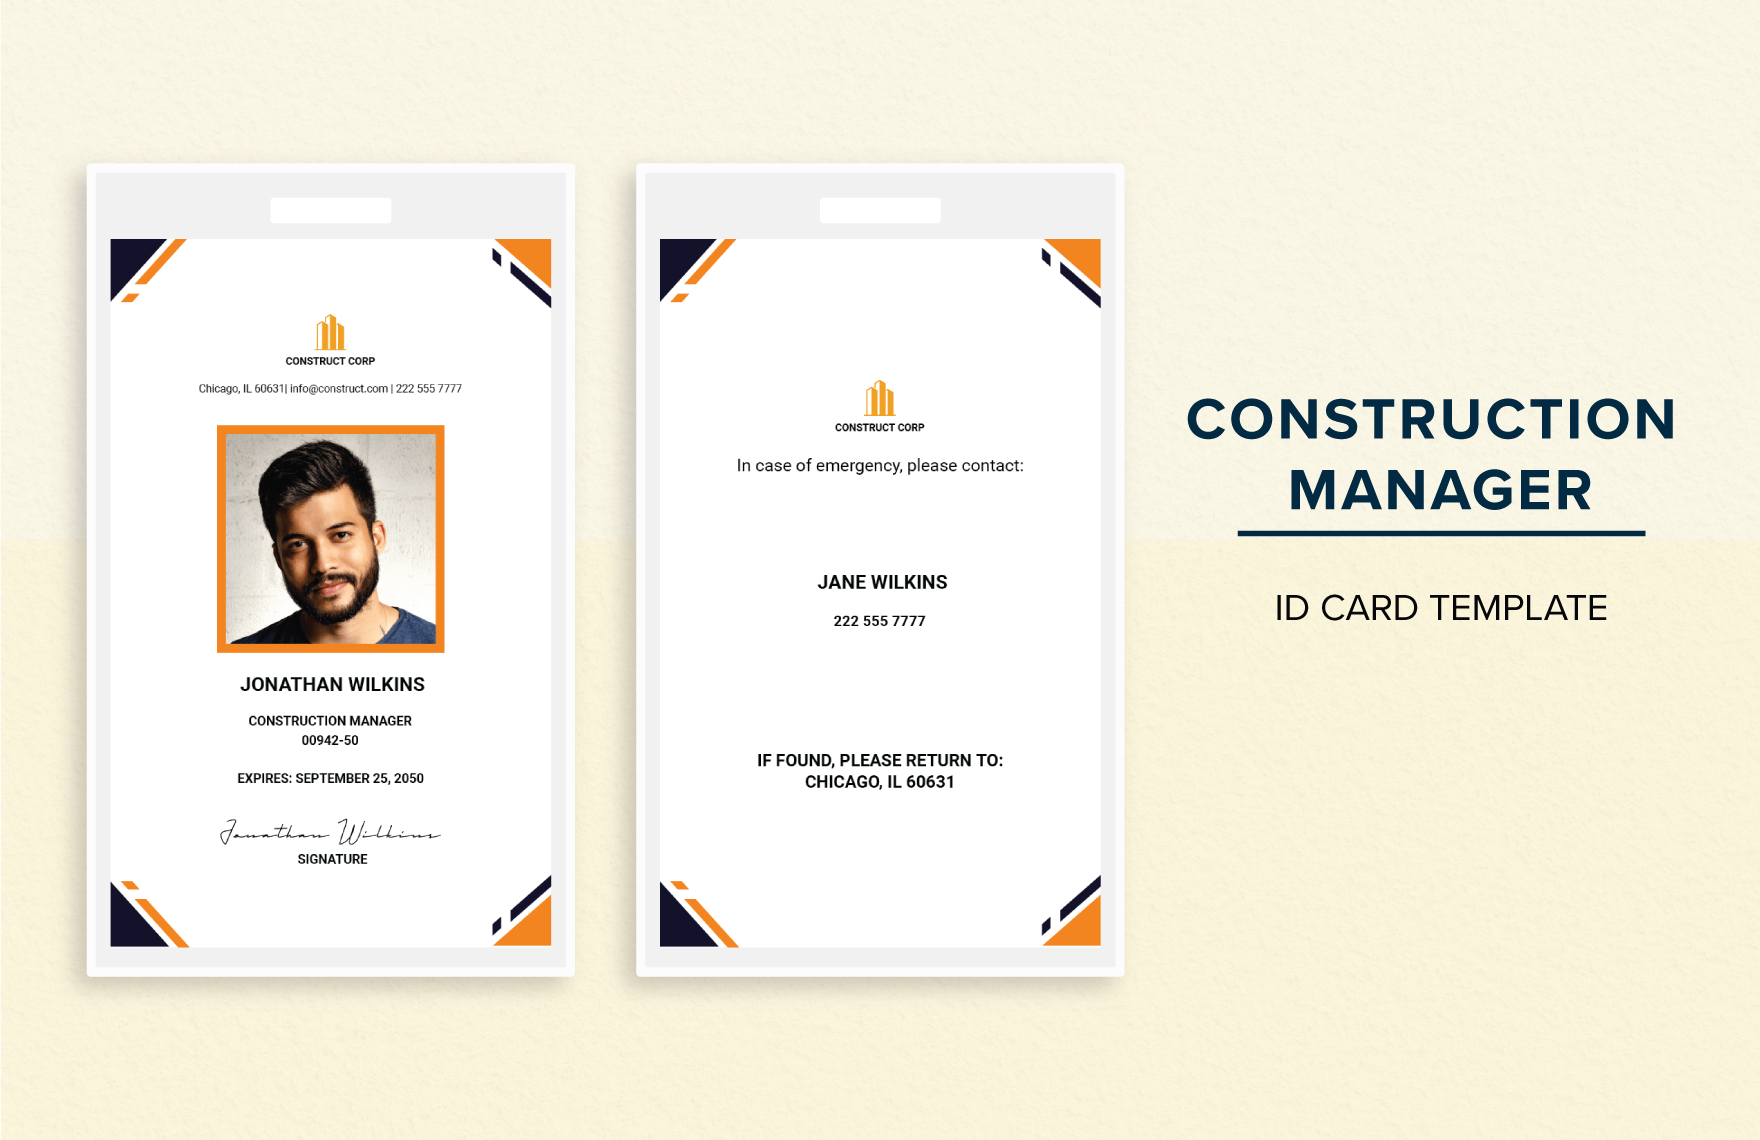 Construction Manager ID Card Template